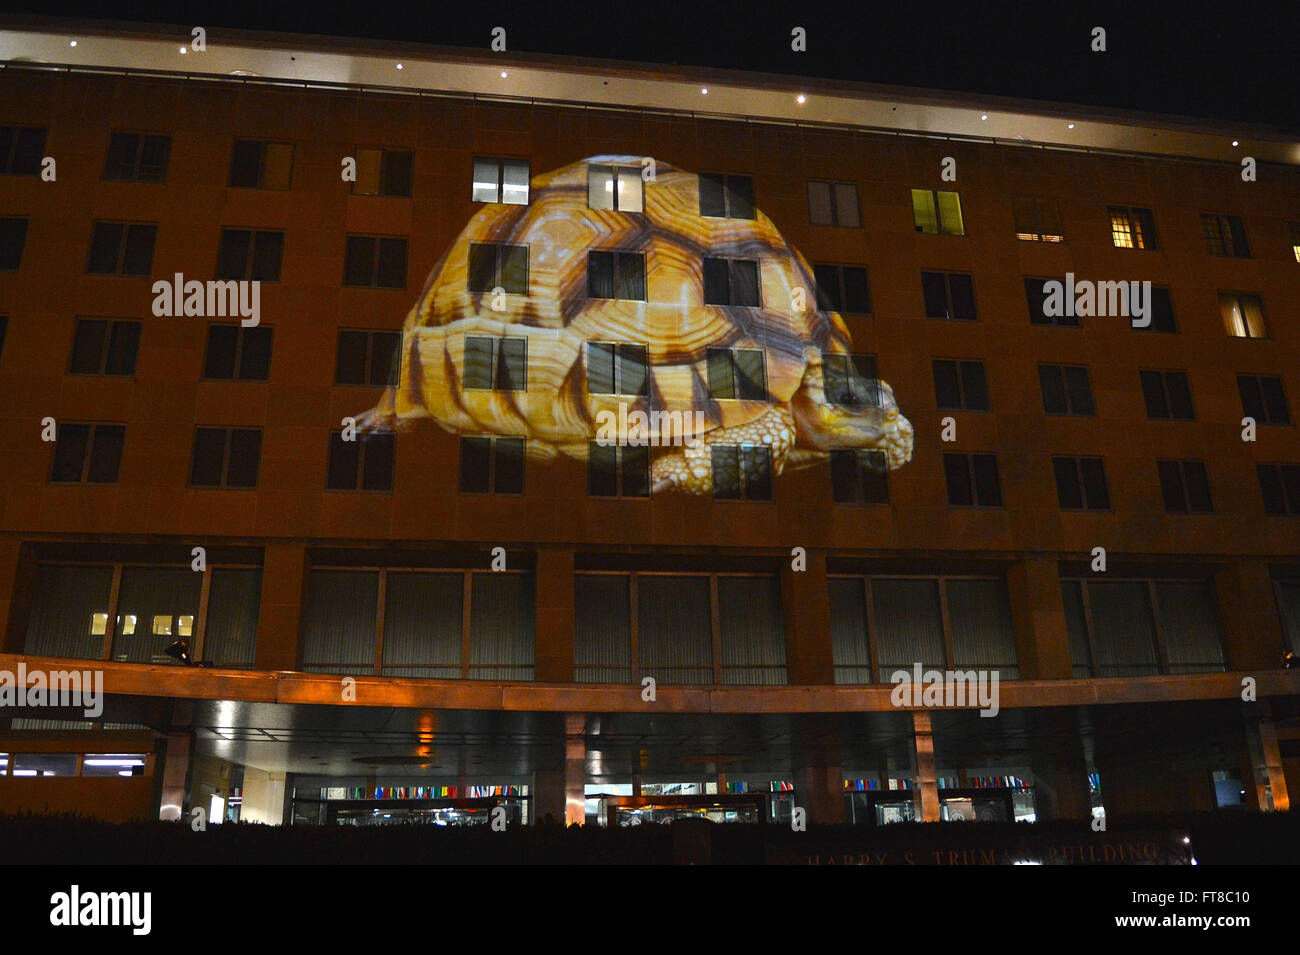 The U.S. Department of State, in partnership with Discovery Communications, Vulcan Productions, and the documentary film &quot;Racing Extinction,&quot; projects images of wildlife, including many threatened species, on the U.S. Department of State's C Street façade in Washington, D.C., on March 2, 2016. The goal is to raise awareness of, and spur action on the global threat of wildlife trafficking. [State Department photo/ Public Domain] Stock Photo